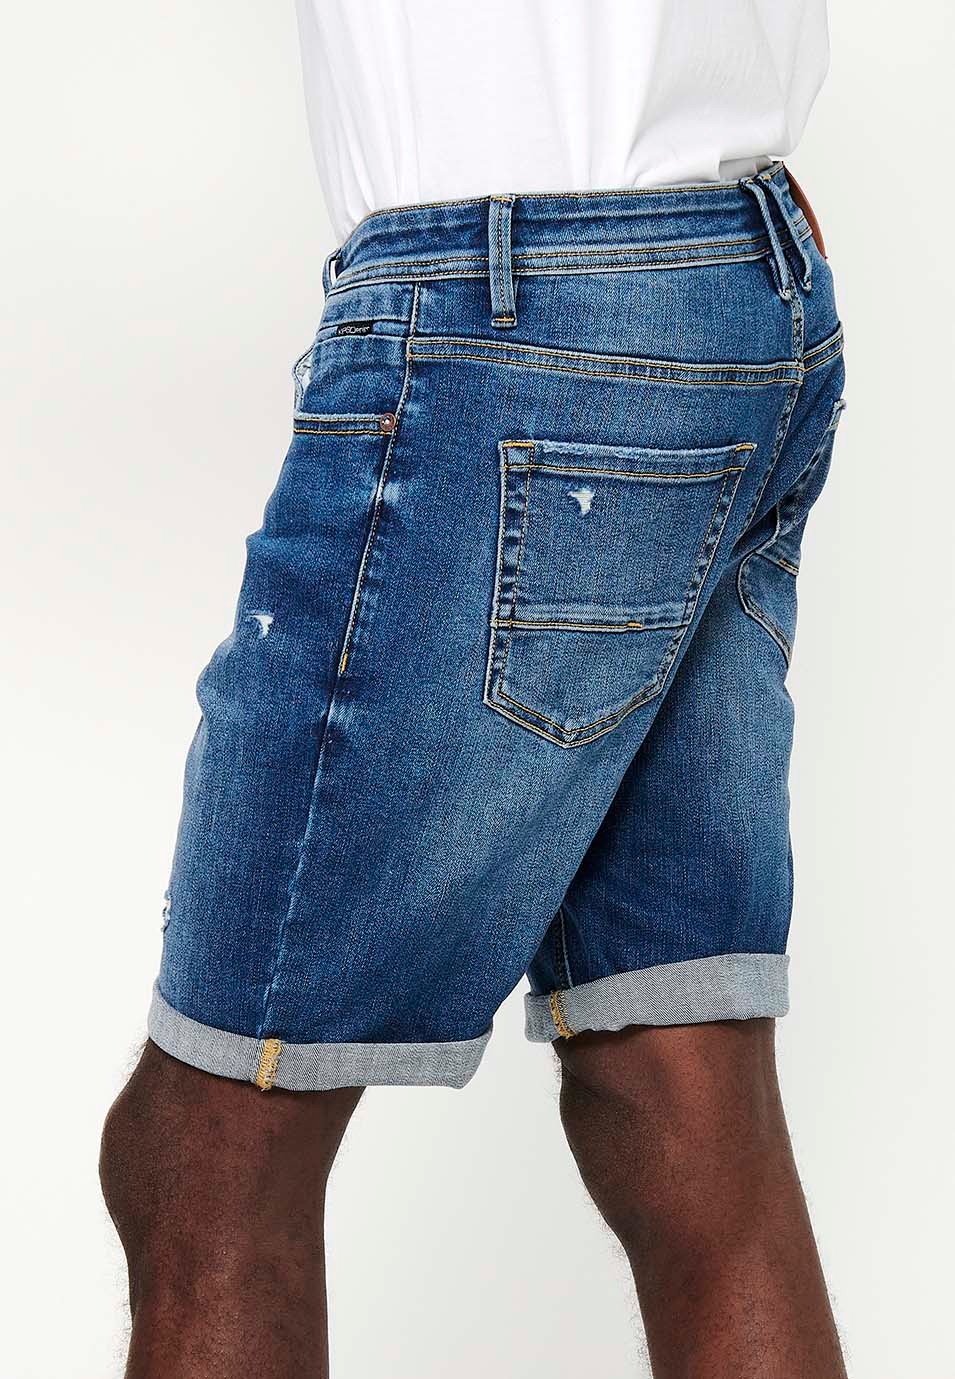 Shorts with turn-up finish and front zipper and button closure with five pockets, one blue pocket pocket for Men 8